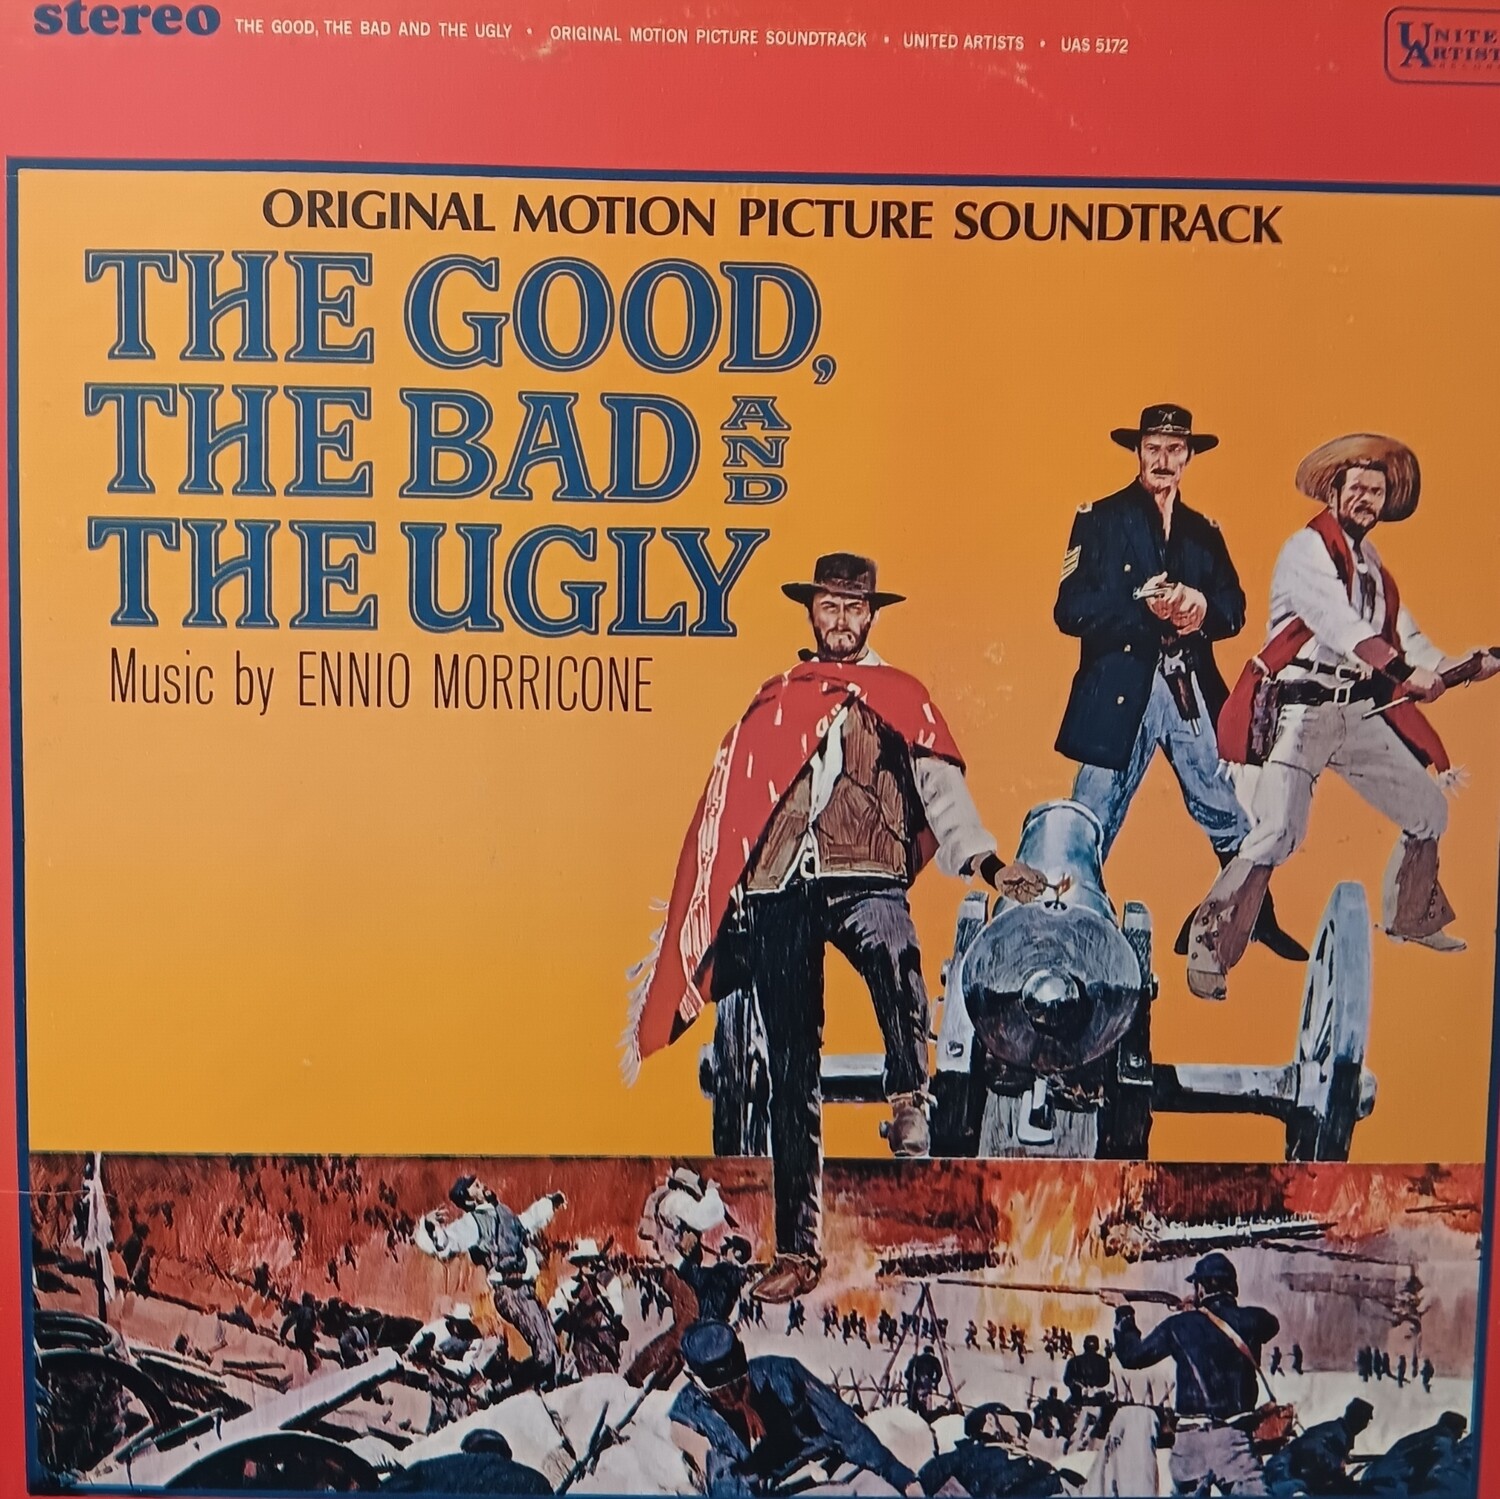 ENNIO MORRICONE - The good the bad and the ugly